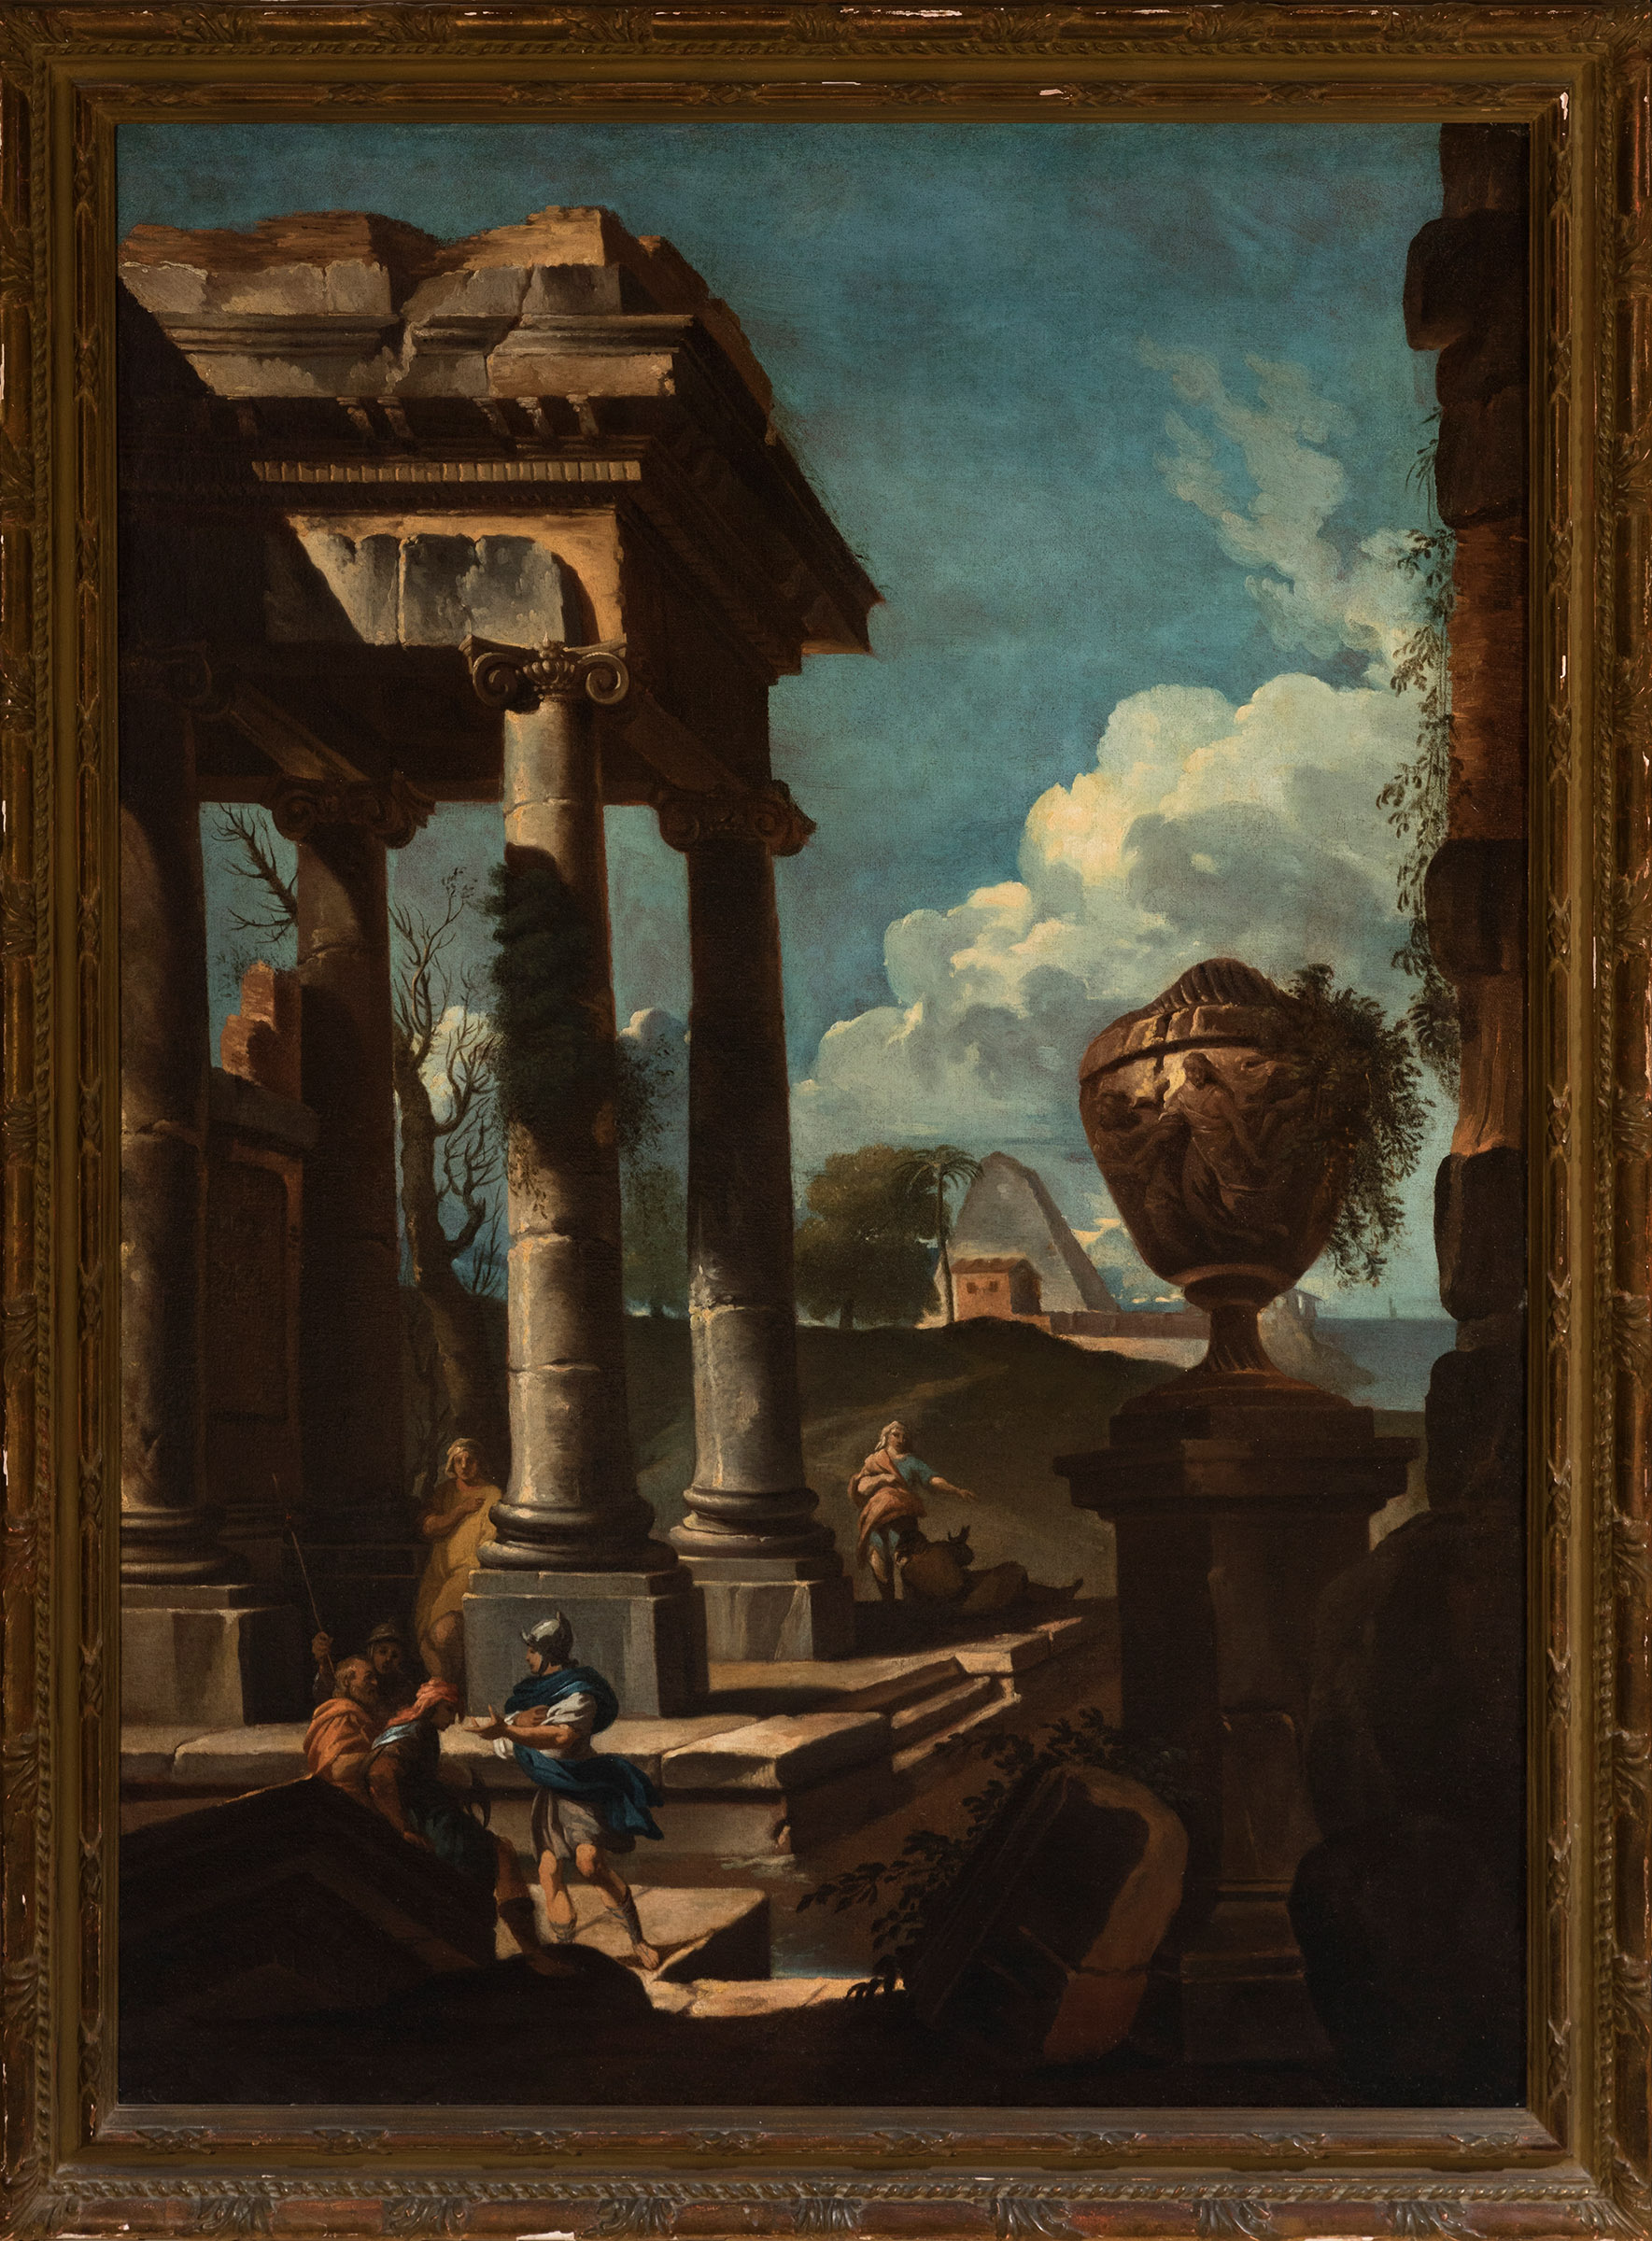 ANDREA LOCATELLI (Rome ,1695-1741)"Caprices of ruins".Oil on canvas. Re-drawn.Enclosed report of Don - Image 5 of 7